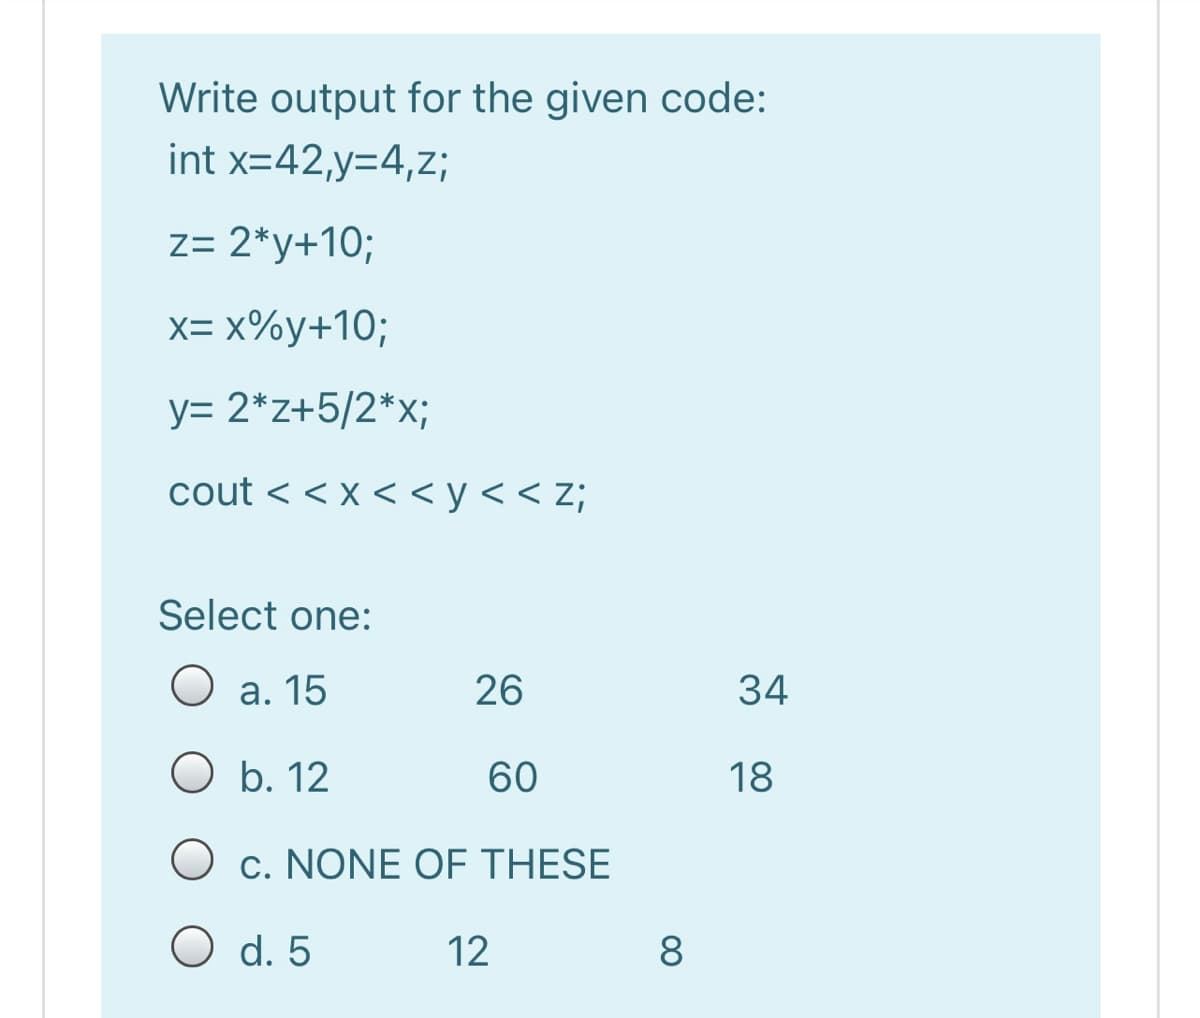 Write output for the given code:
int x=42,y=4,z;
z= 2*y+10;
X-X%у+10;
y= 2*z+5/2*x;
cout < < x < < y < < z;
Select one:
O a. 15
26
34
O b. 12
60
18
O c. NONE OF THESE
O d. 5
12
8
